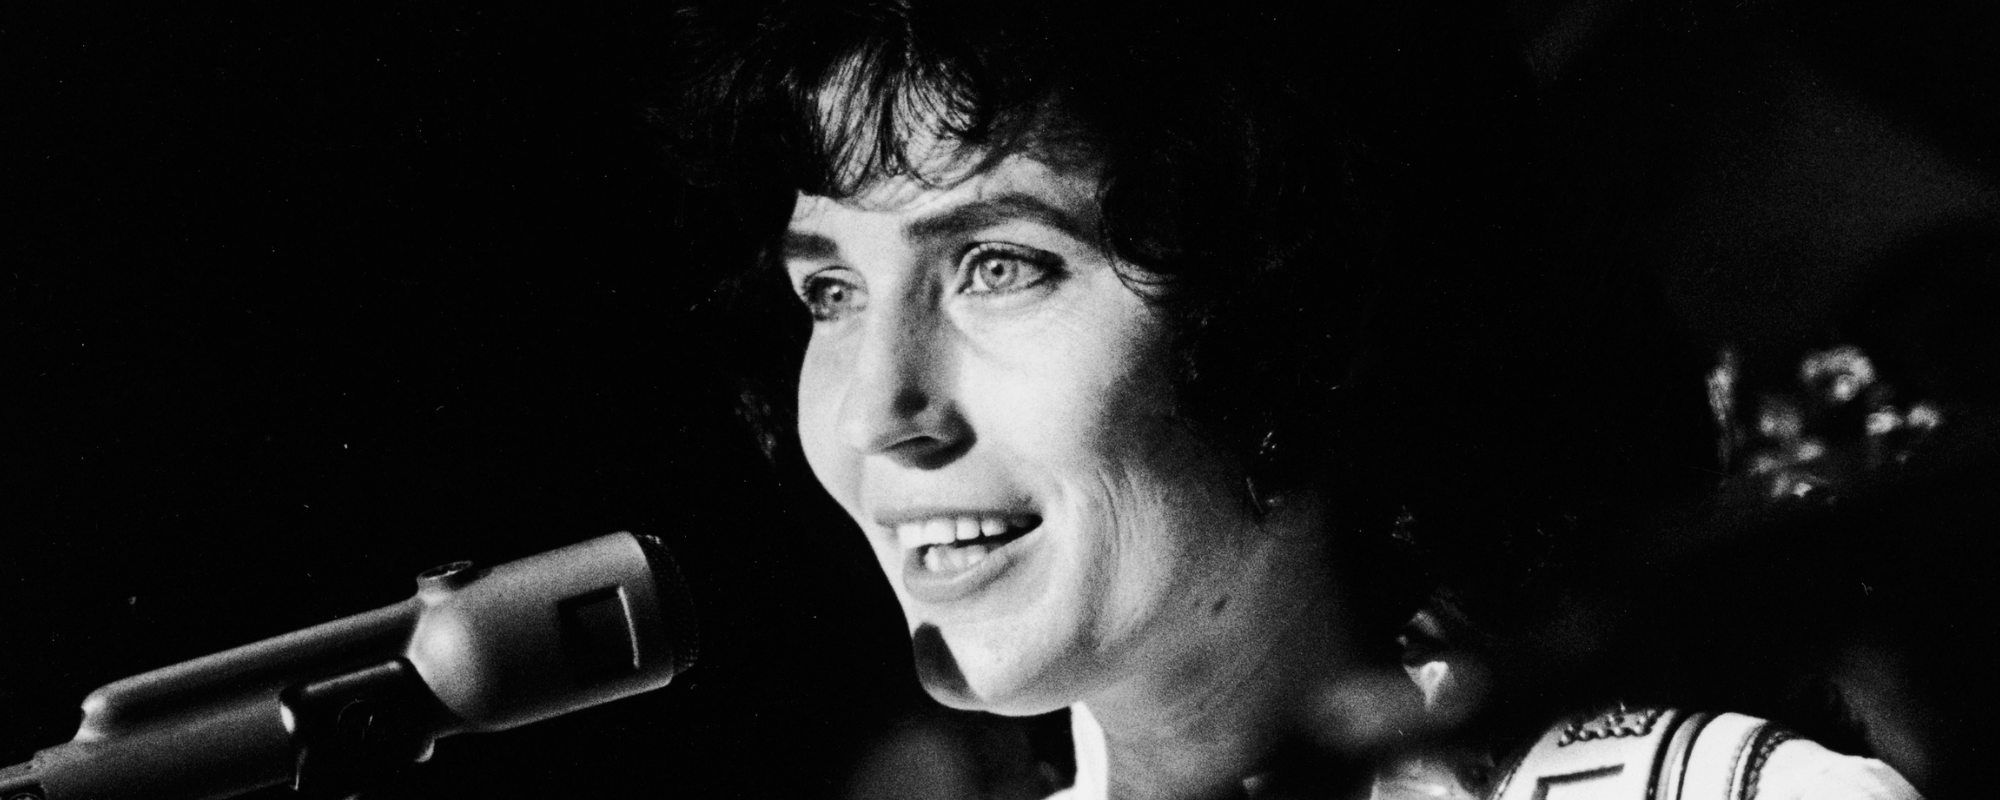 The Meaning Behind Loretta Lynn’s Self-Affirming Classic “You’re Lookin’ at Country”